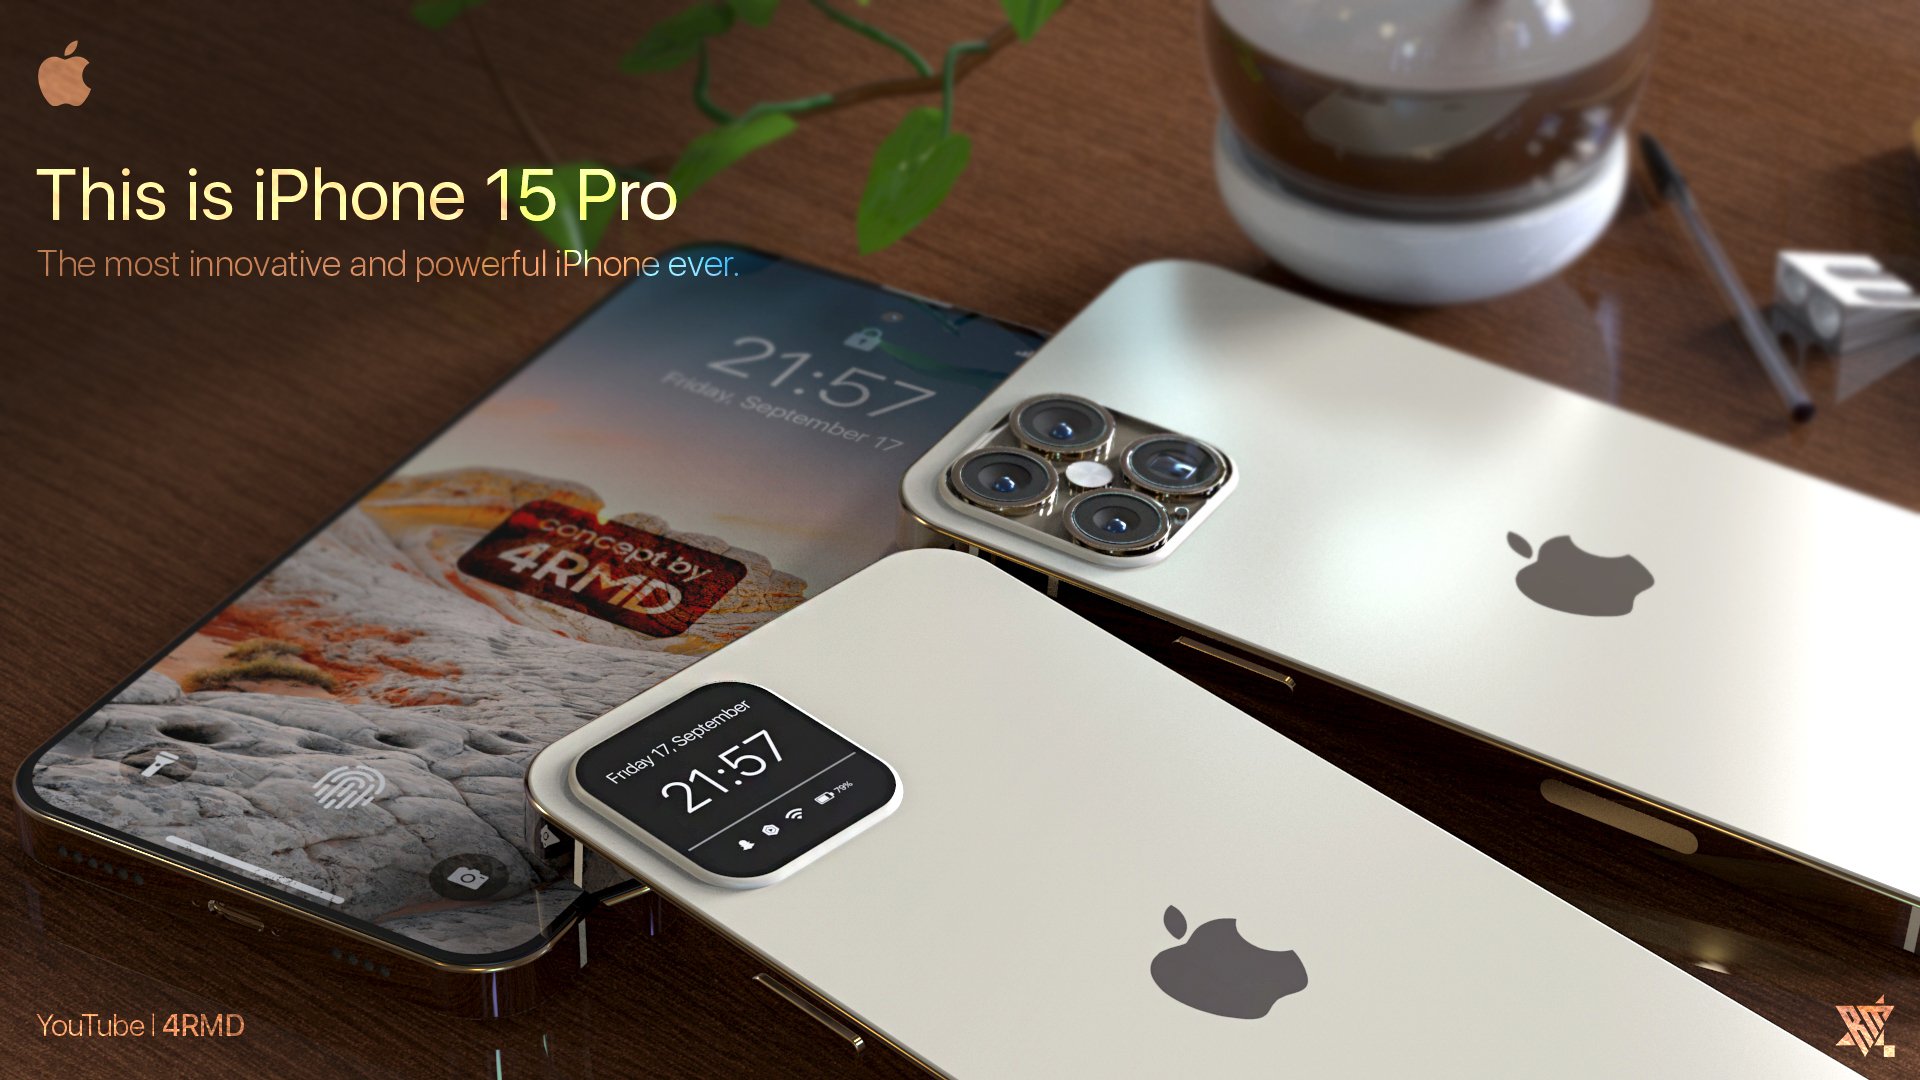 Apple iPhone 15 Pro and 15 Pro Max - what to expect? - GSMArena.com news